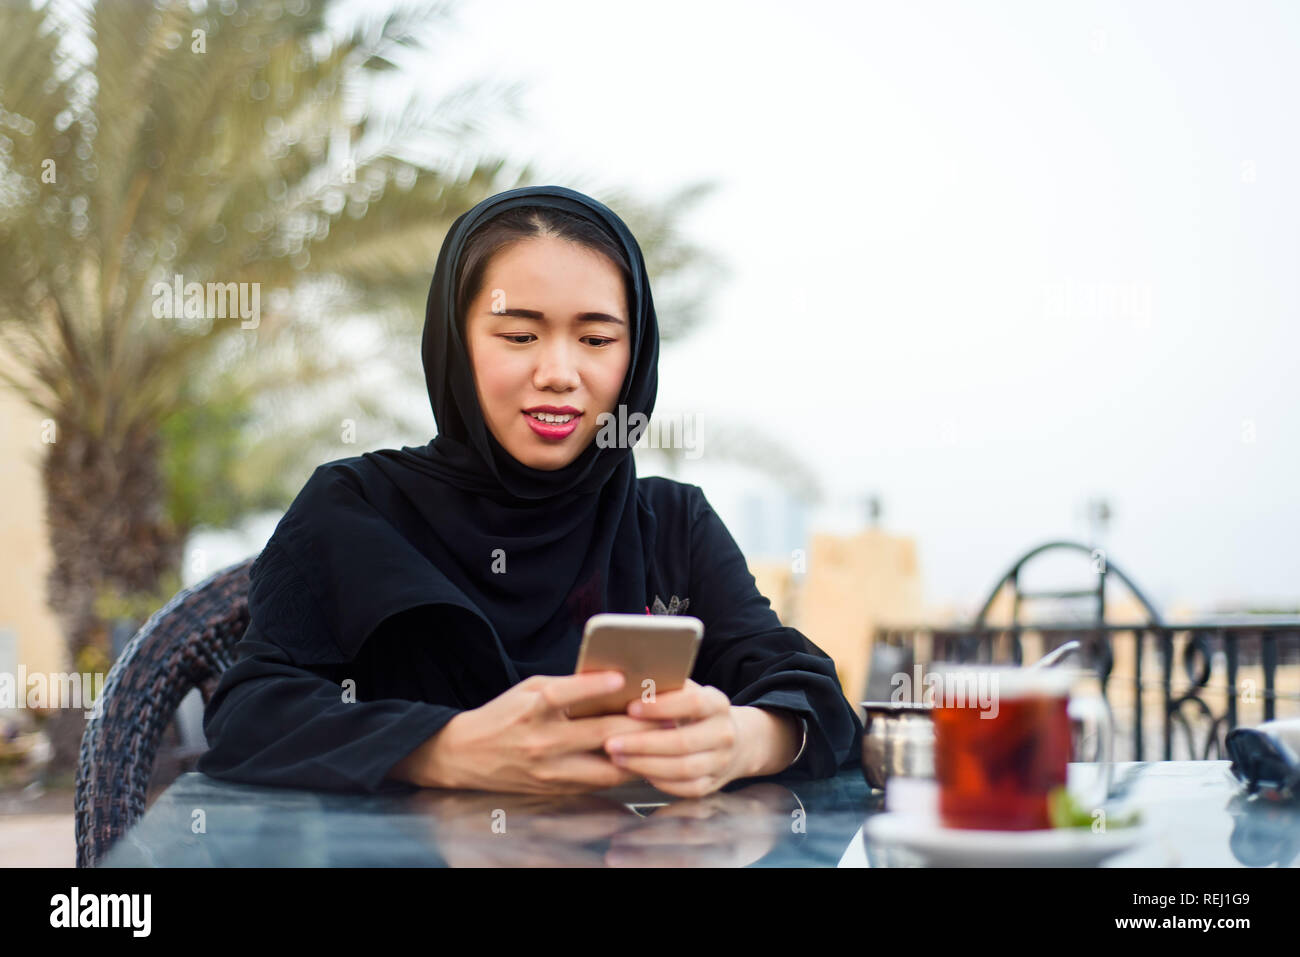 Muslim woman using phone while having a cup of coffee outdoors Stock Photo